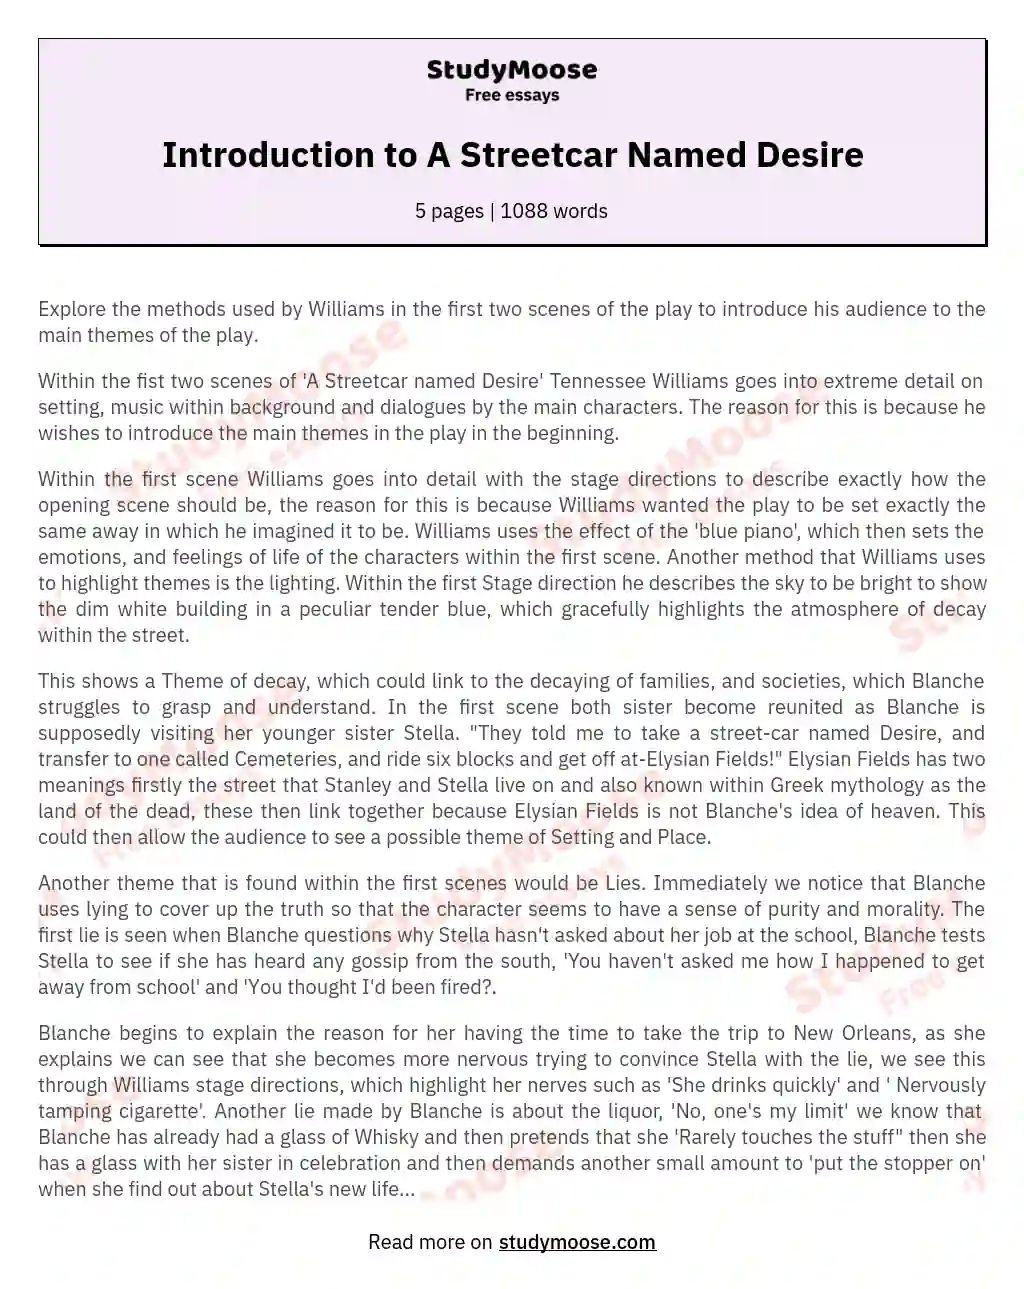 Introduction to A Streetcar Named Desire